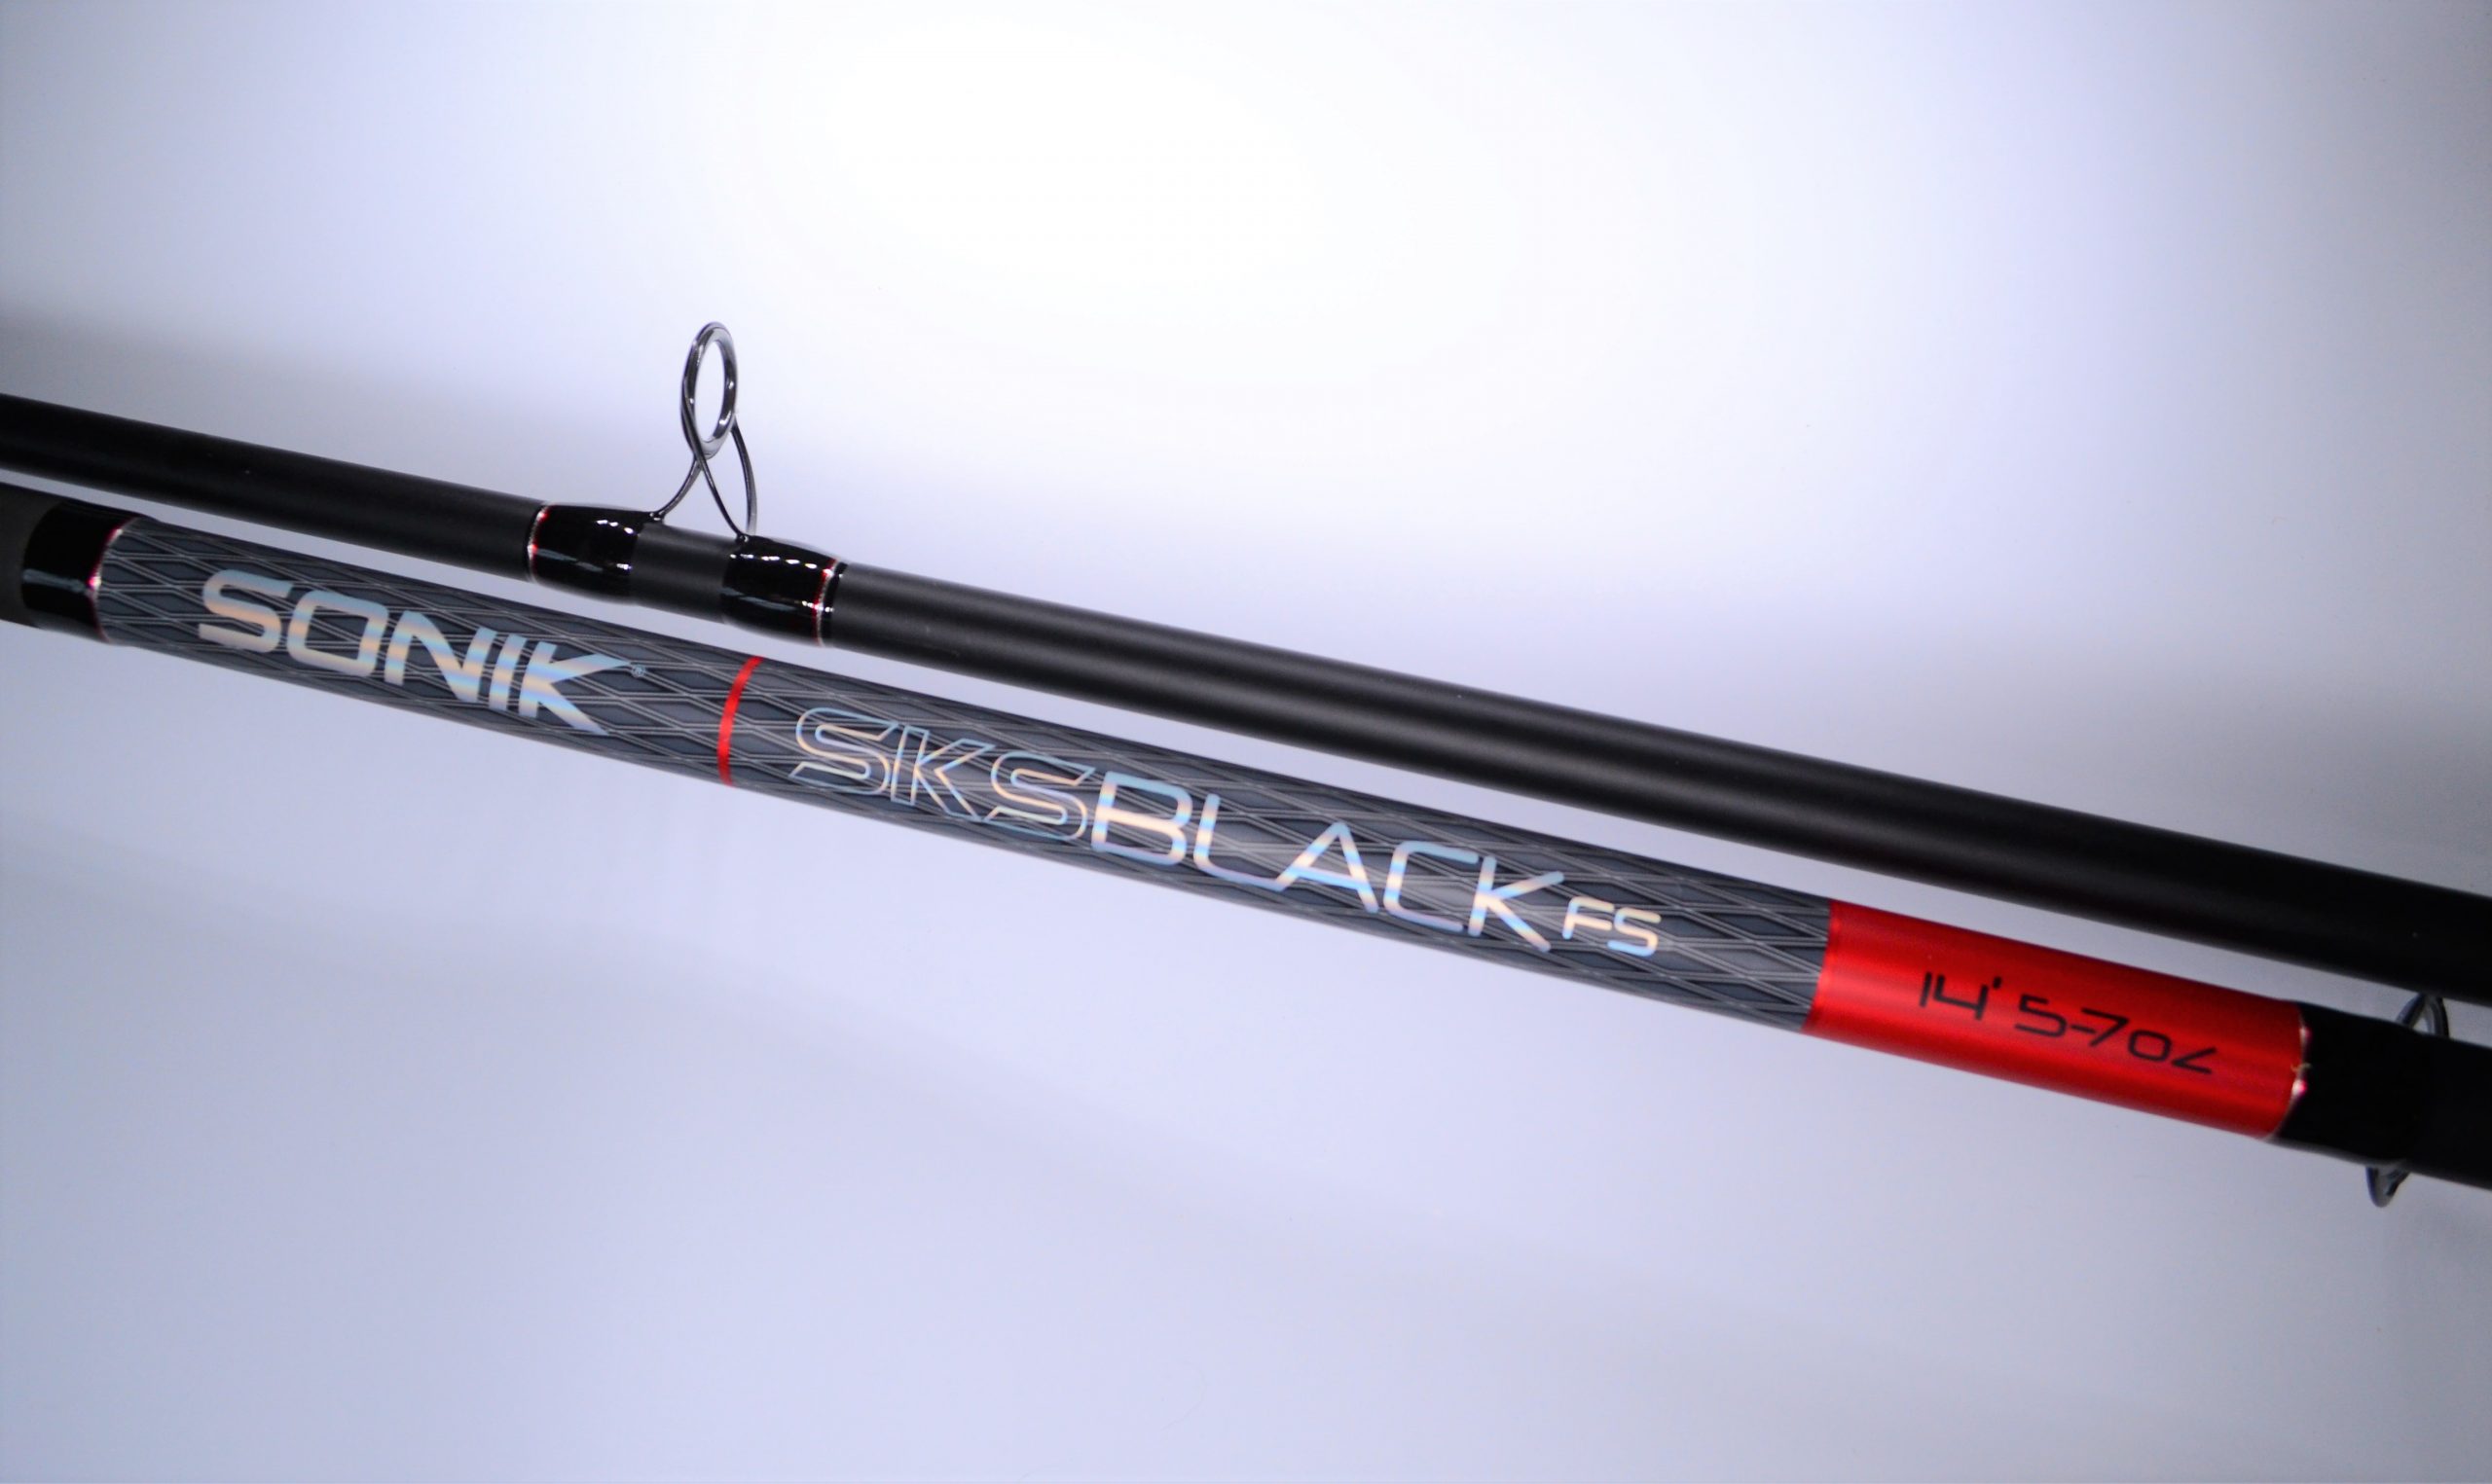 Sonik SKS Black 14ft fs 4-6oz £99.99 (Collection Only) - Abbotsbury Fishing  Tackle